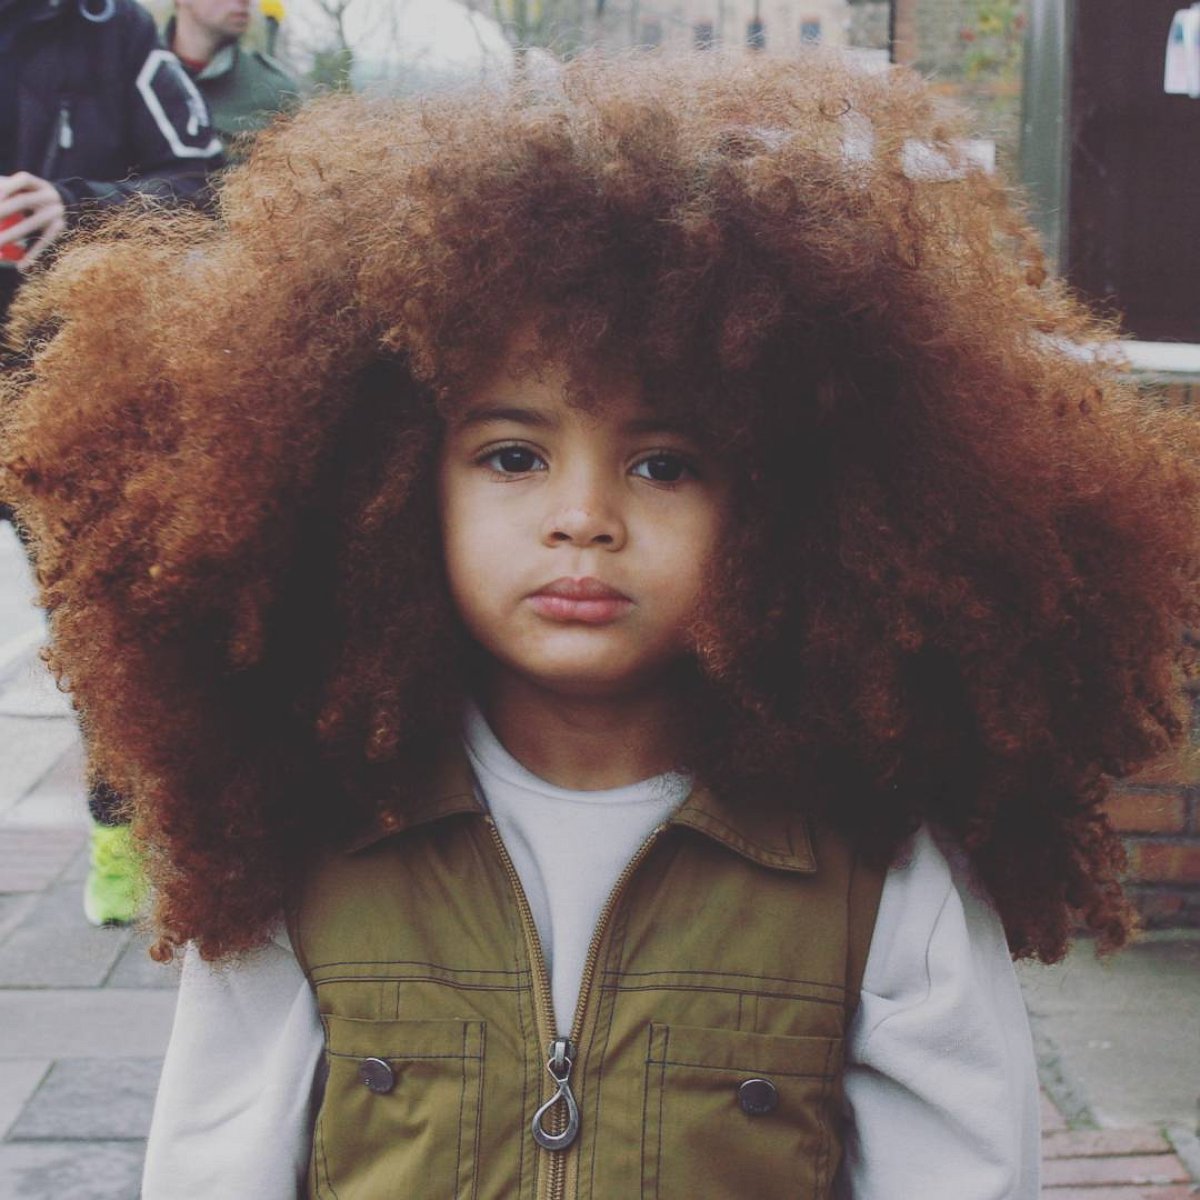 PHOTO: Big-Haired Little Boy Earns Internet Fame With Colossal Curls